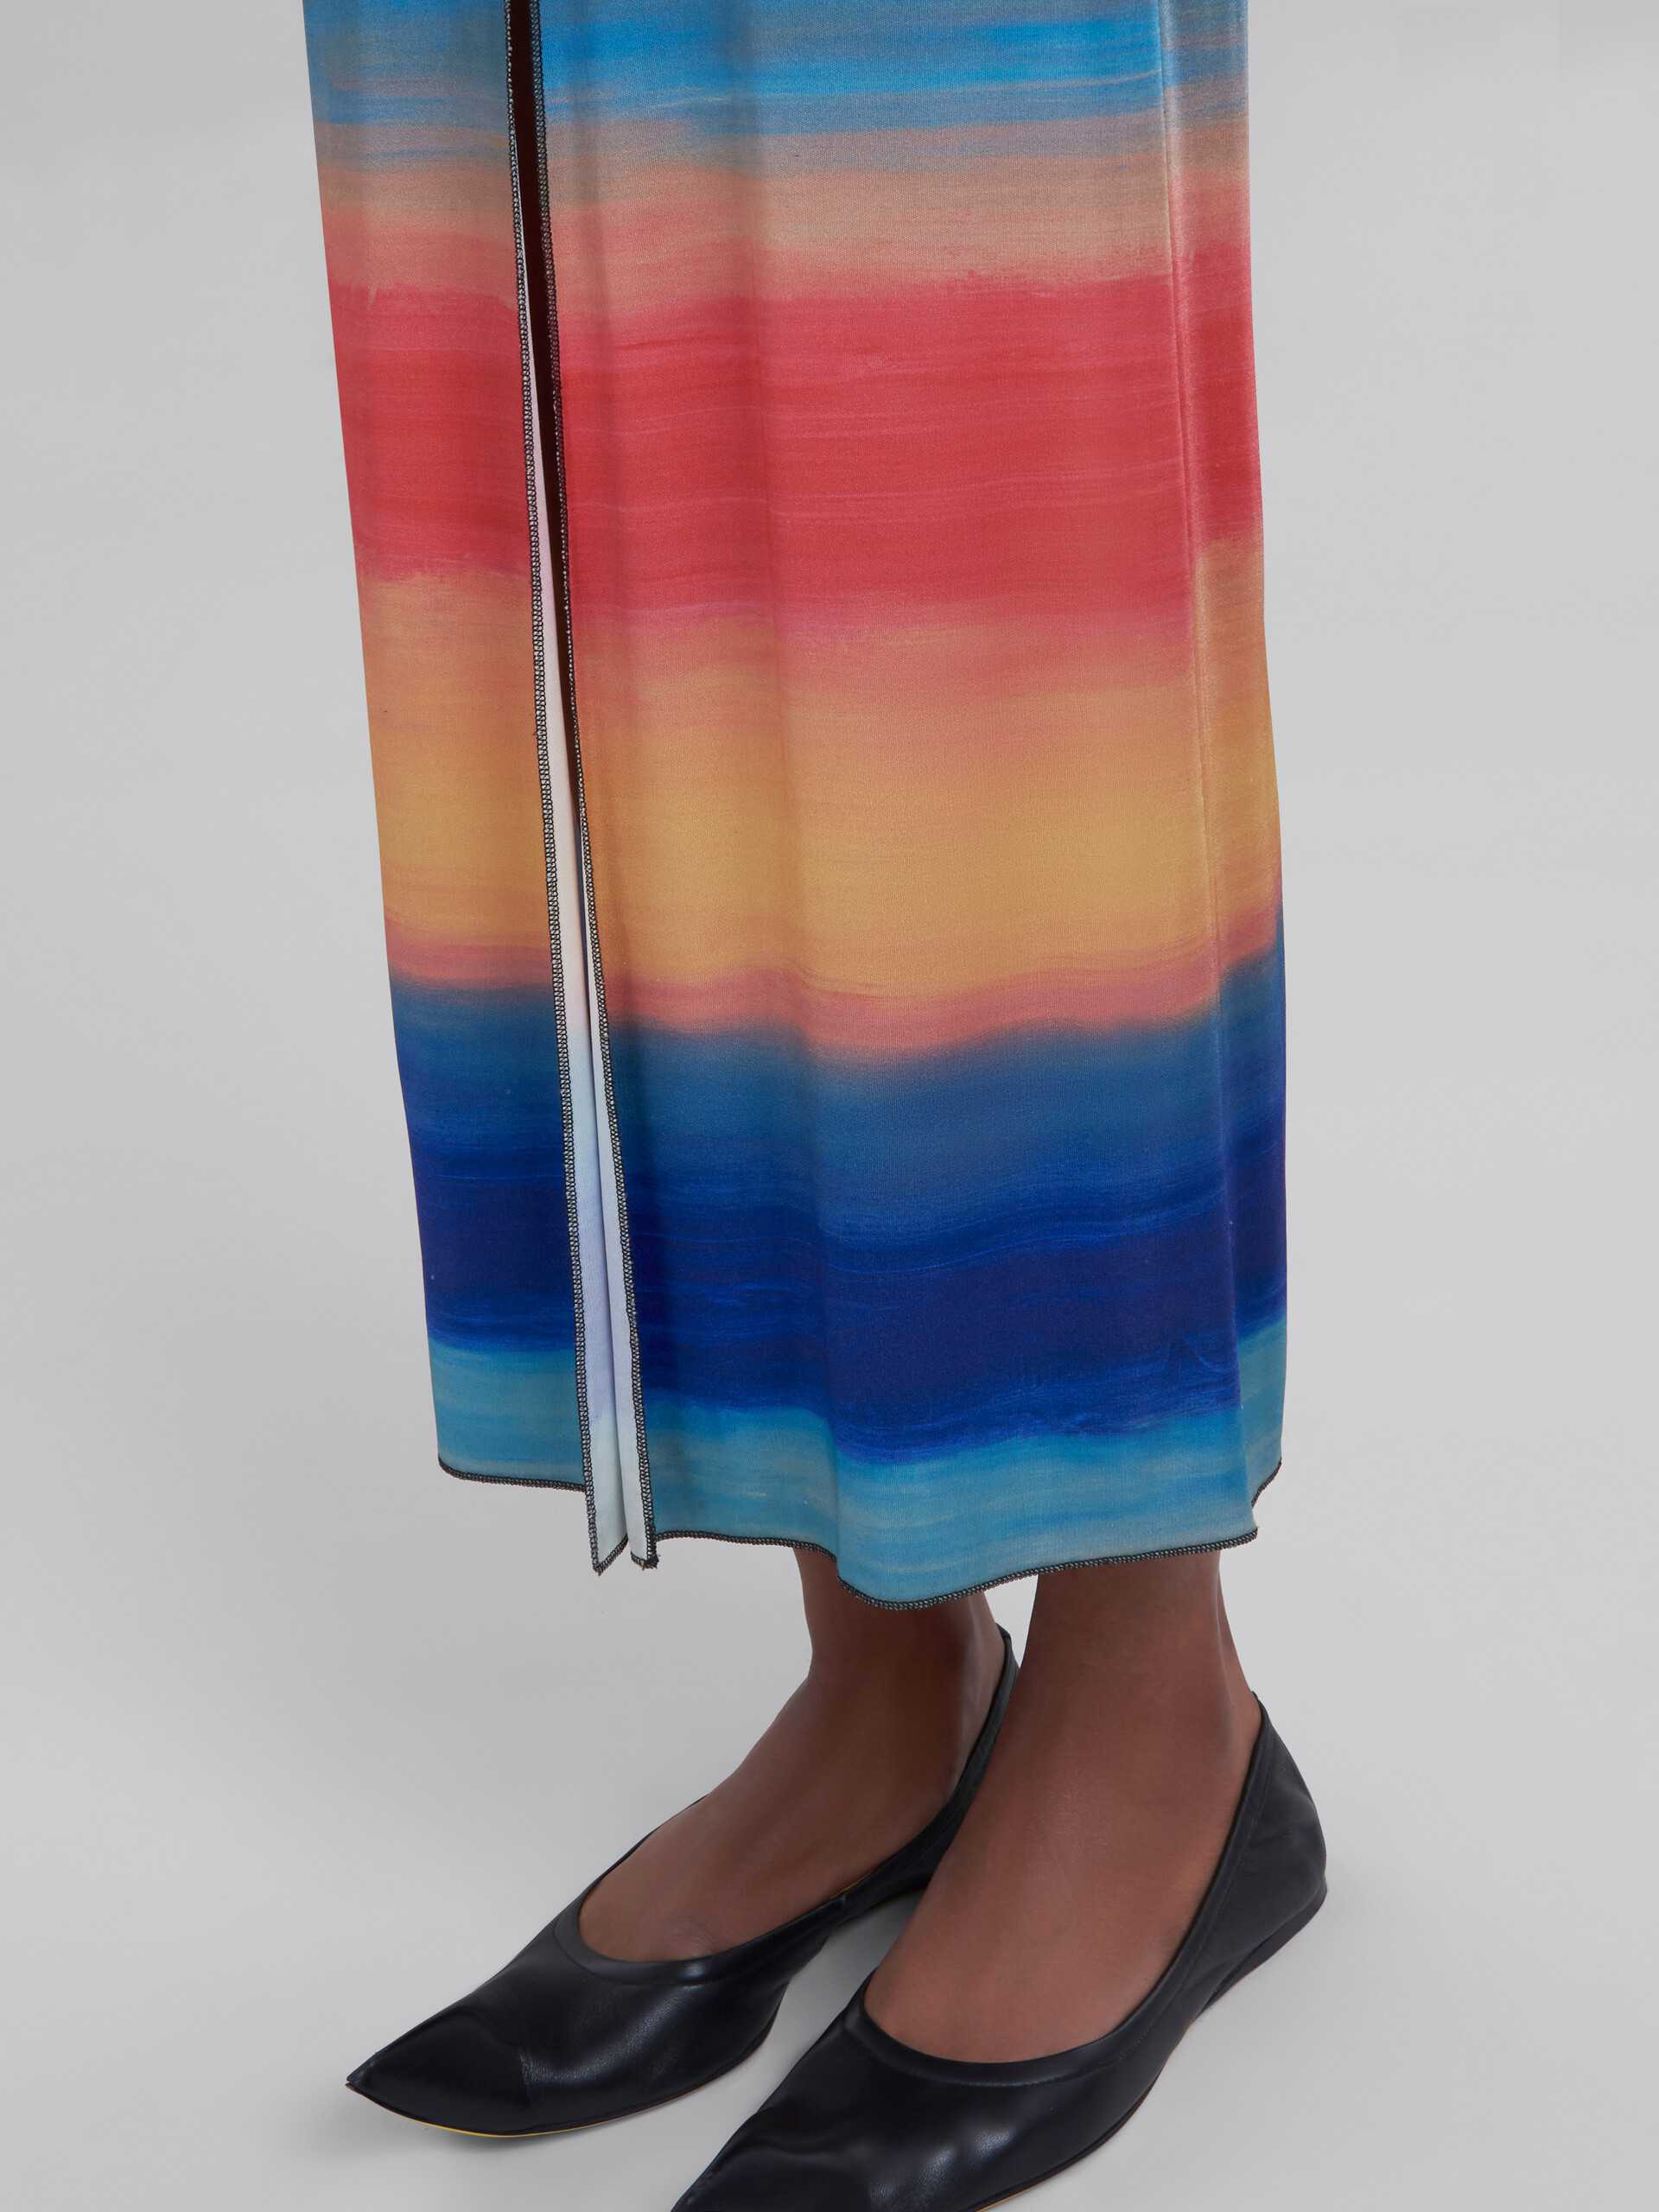 Multicoloured viscose dress with Dark Side of the Moon print - Dresses - Image 5